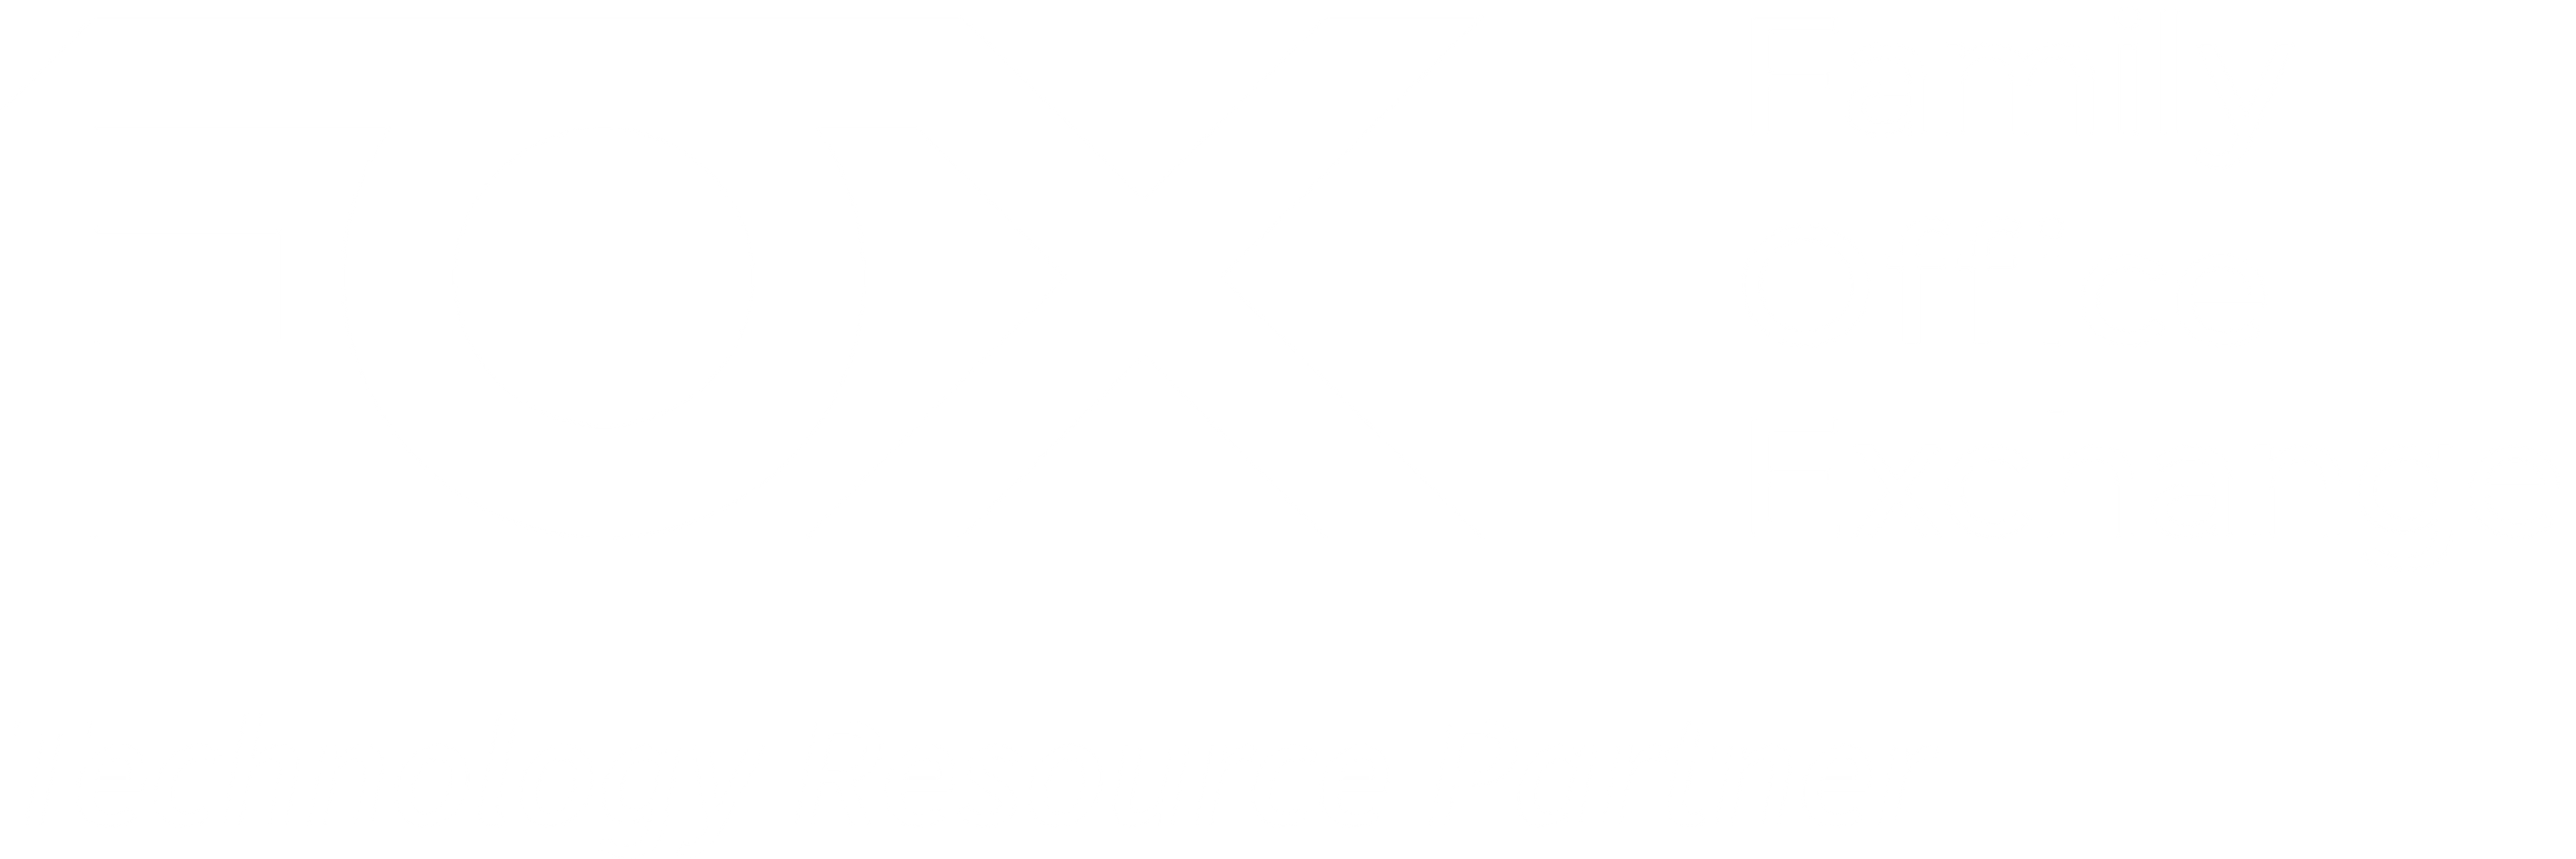 Family Office Exchange Technology Resource Partner